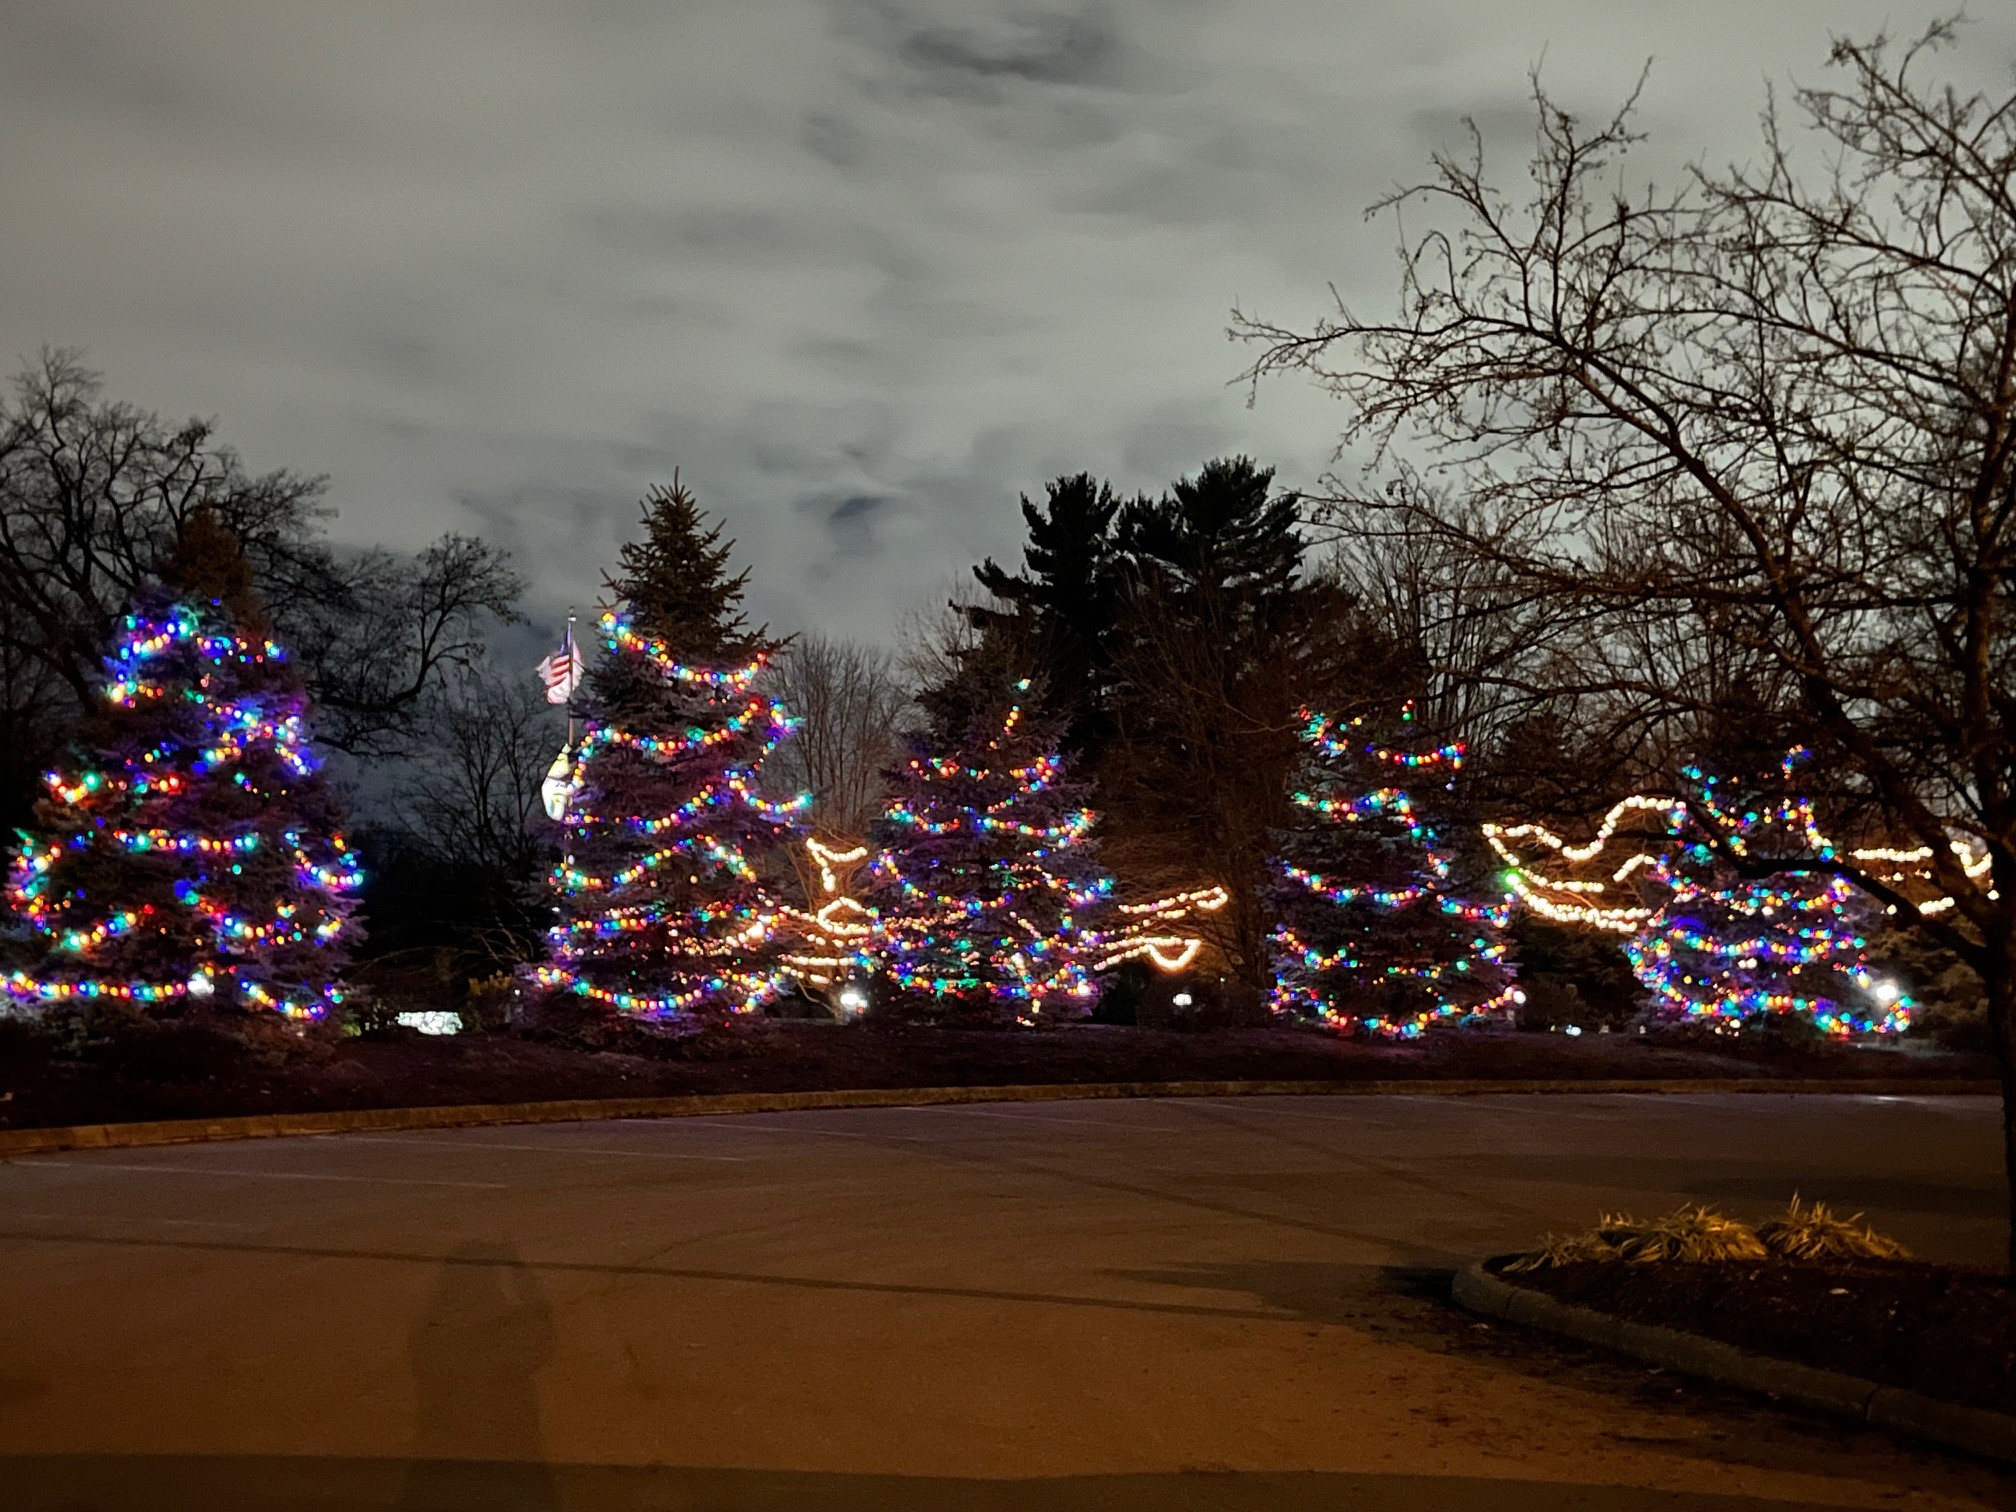 evergreen trees with holiday lights